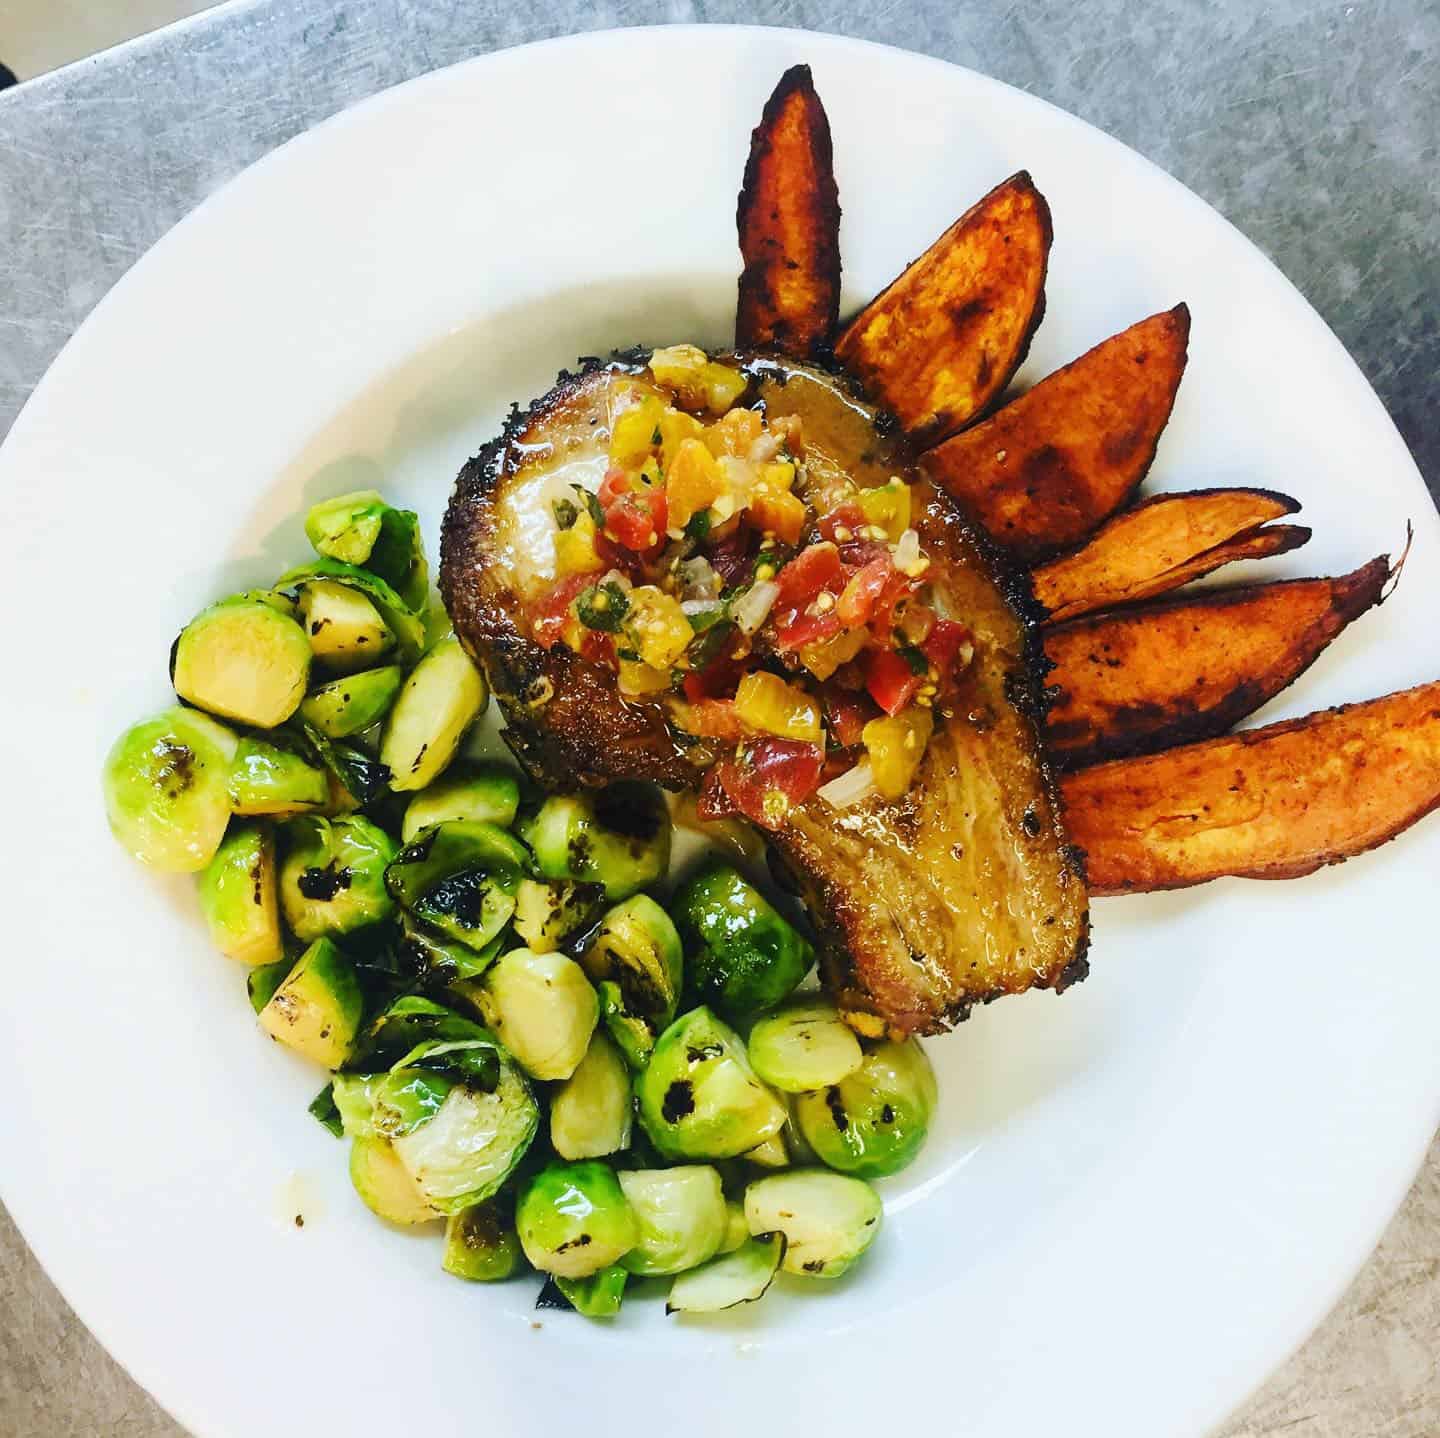 Our recent pork chop special, with sweet potato wedges, brussel sprouts and bruschetta. Keep up with us on social media for our daily specials, but most meals can be altered to meet your dietary needs.